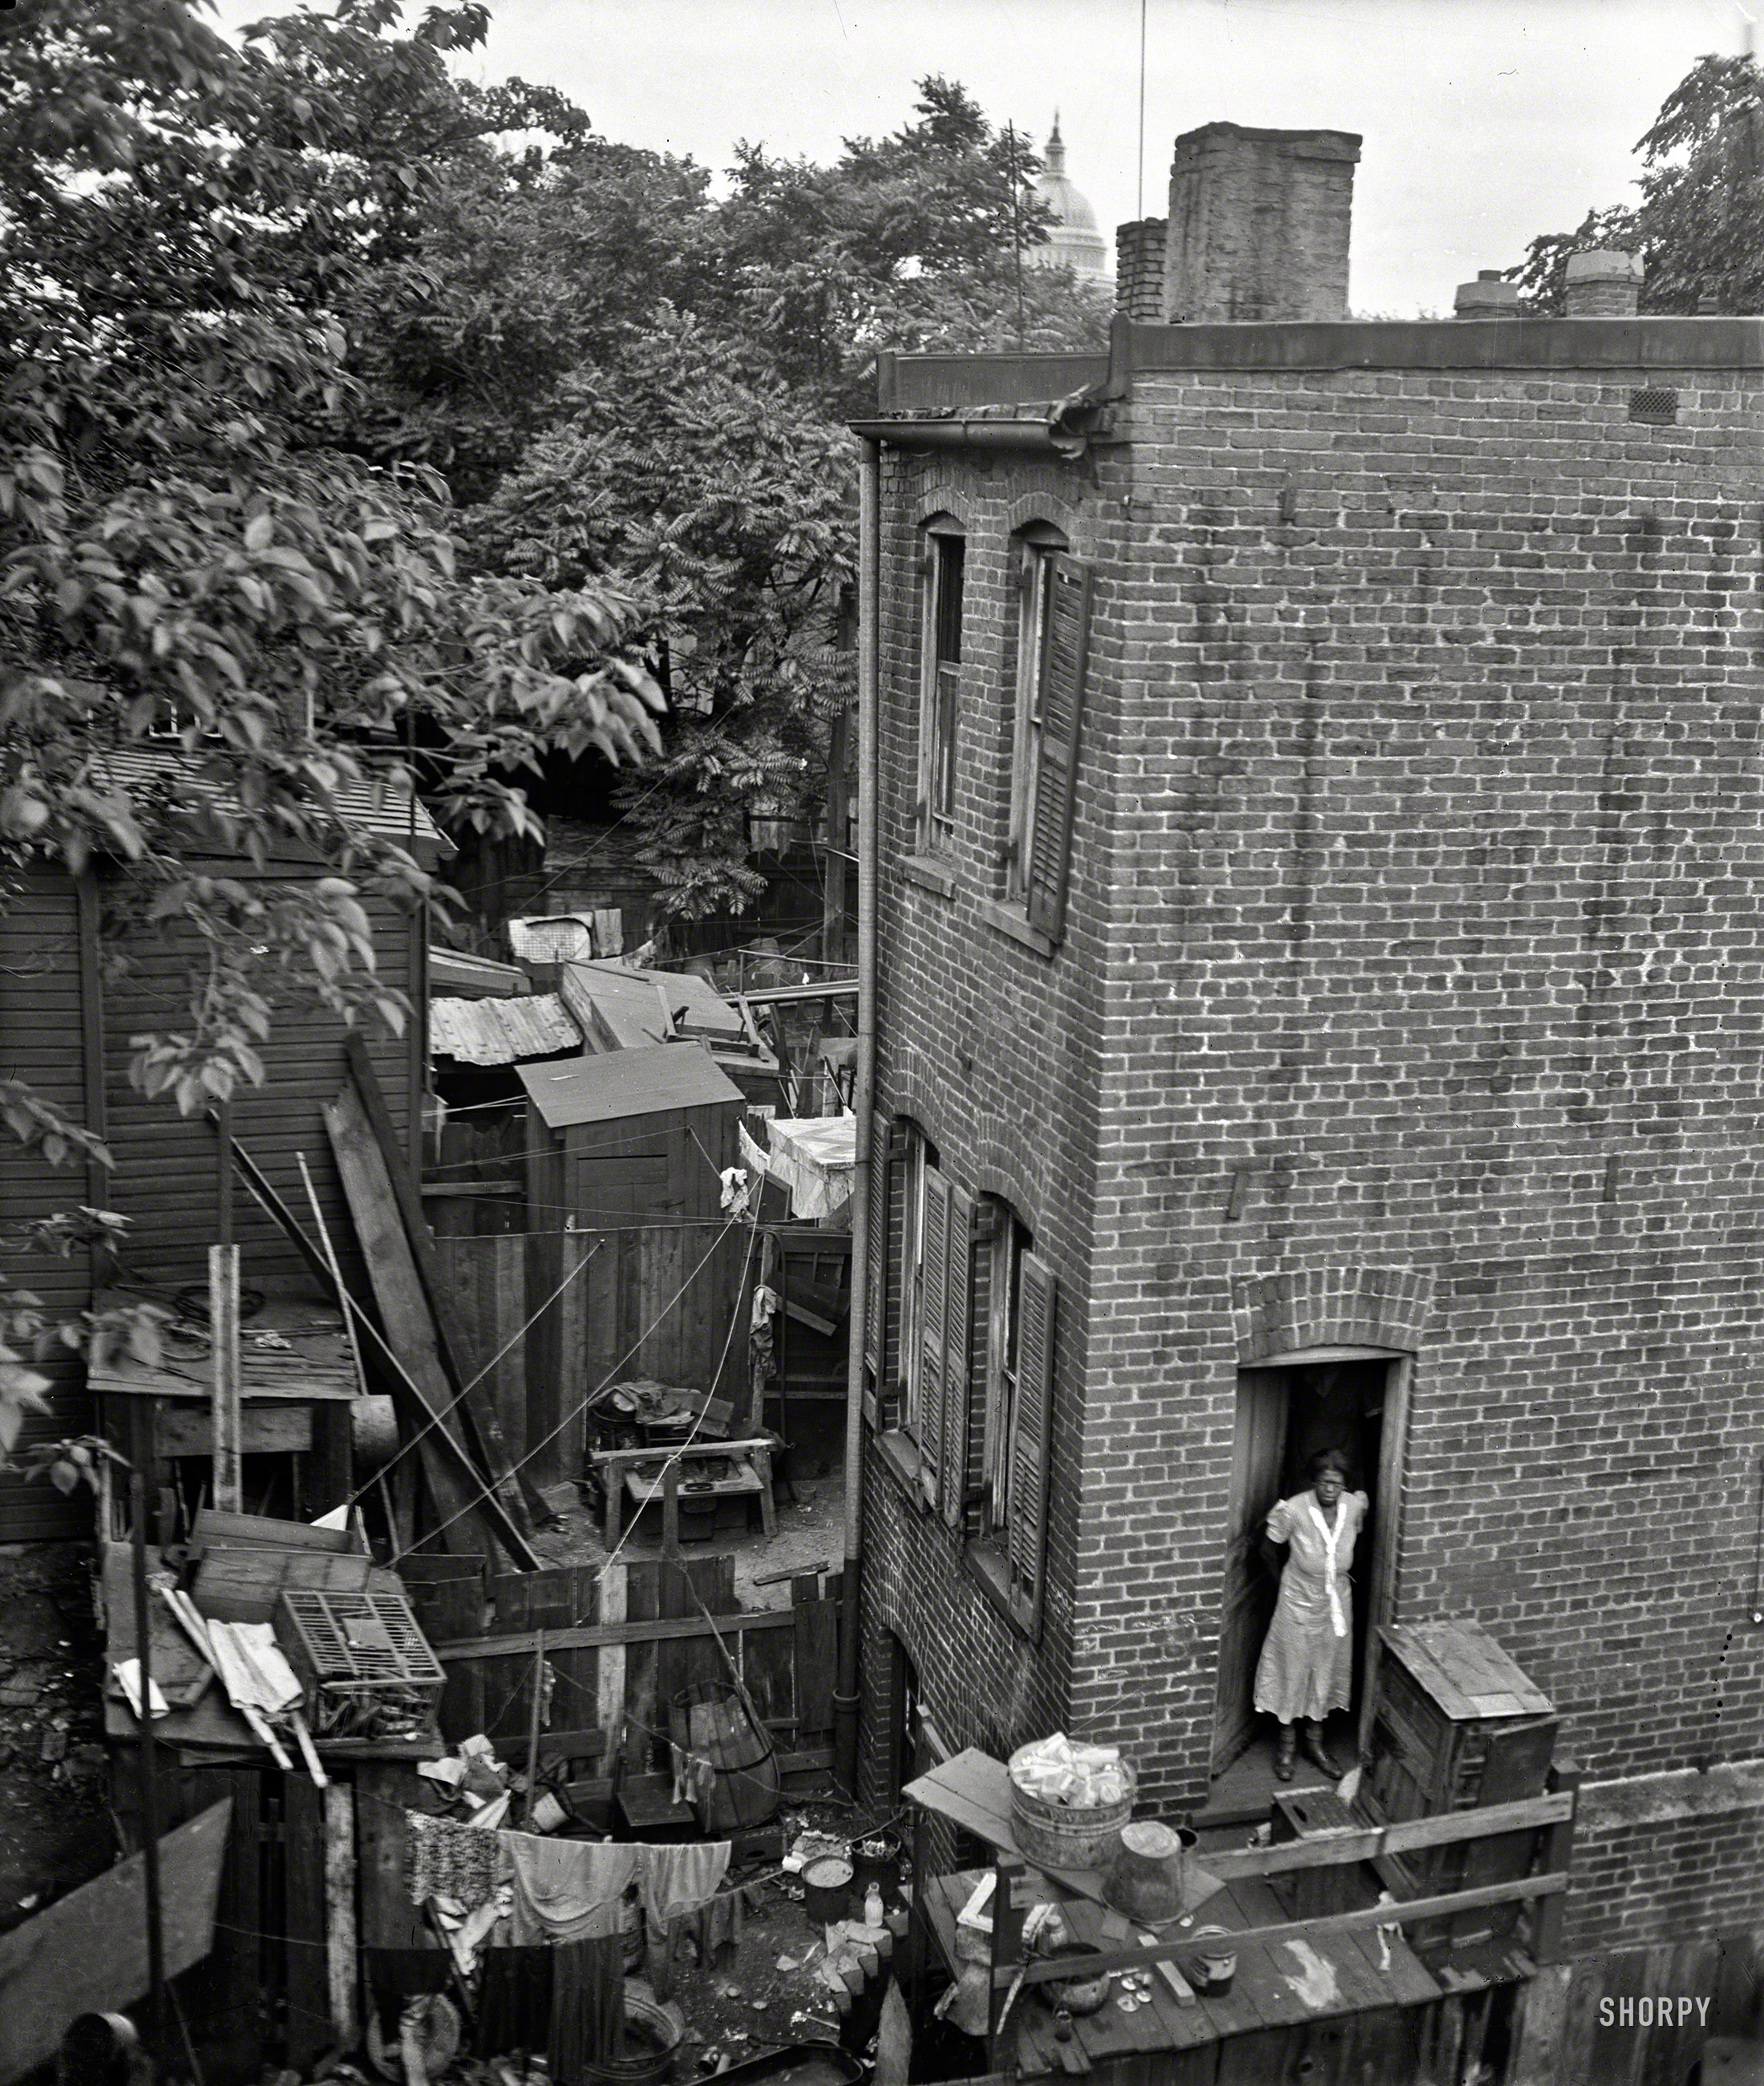 Summer 1935. "Washington, D.C., alley dwelling. The clutter of filth, debris and tin cans all have highly utilitarian purposes. Many of the houses are without gas, water, or electric connections." Note the Capitol dome at the top of the frame. Our second look at this abode. Harris & Ewing glass negative. View full size.